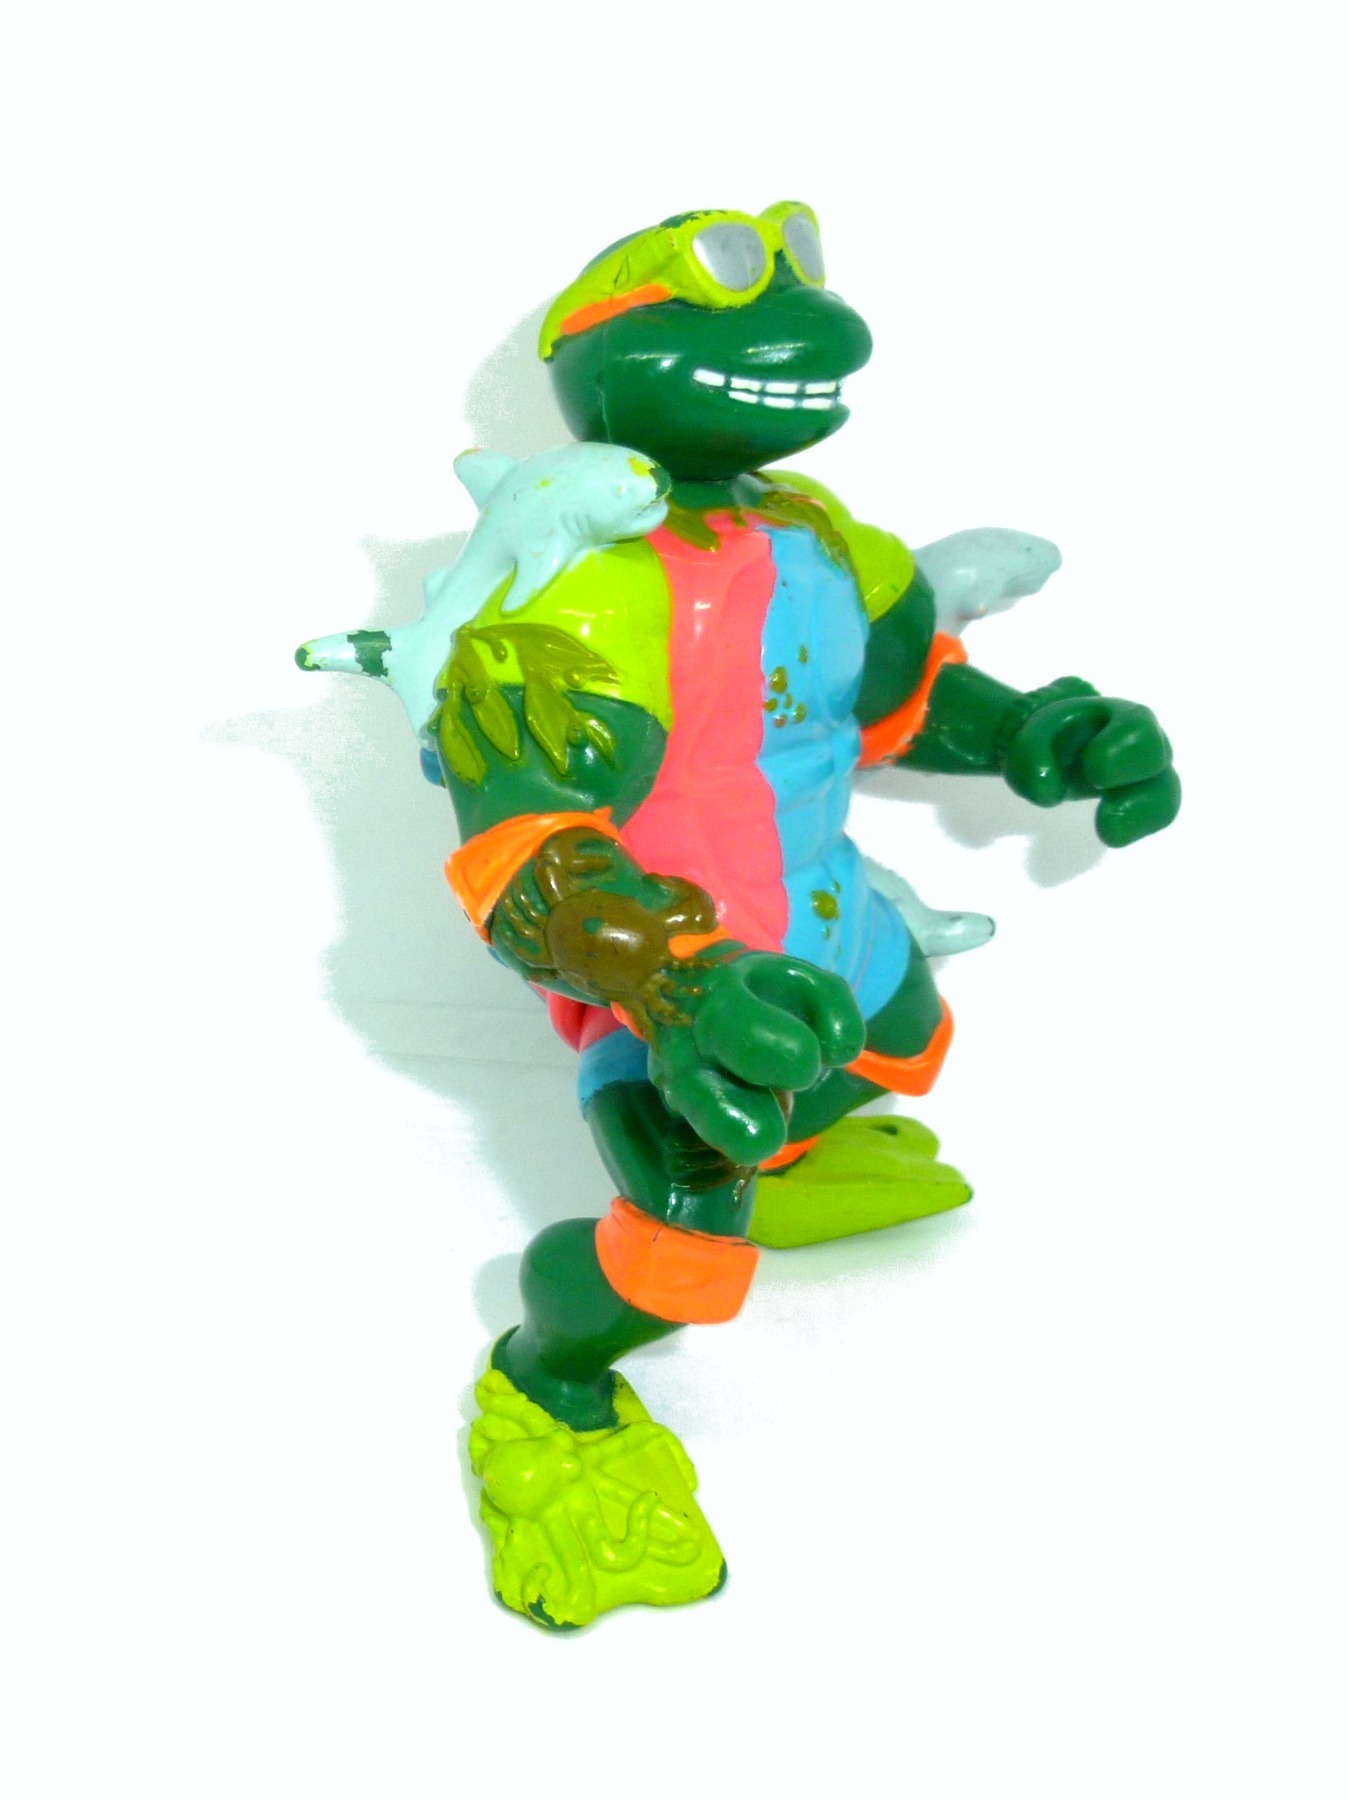 Mike the Sewer Surfer - Michelangelo 1990 Mirage Studios / Playmates Toys 2